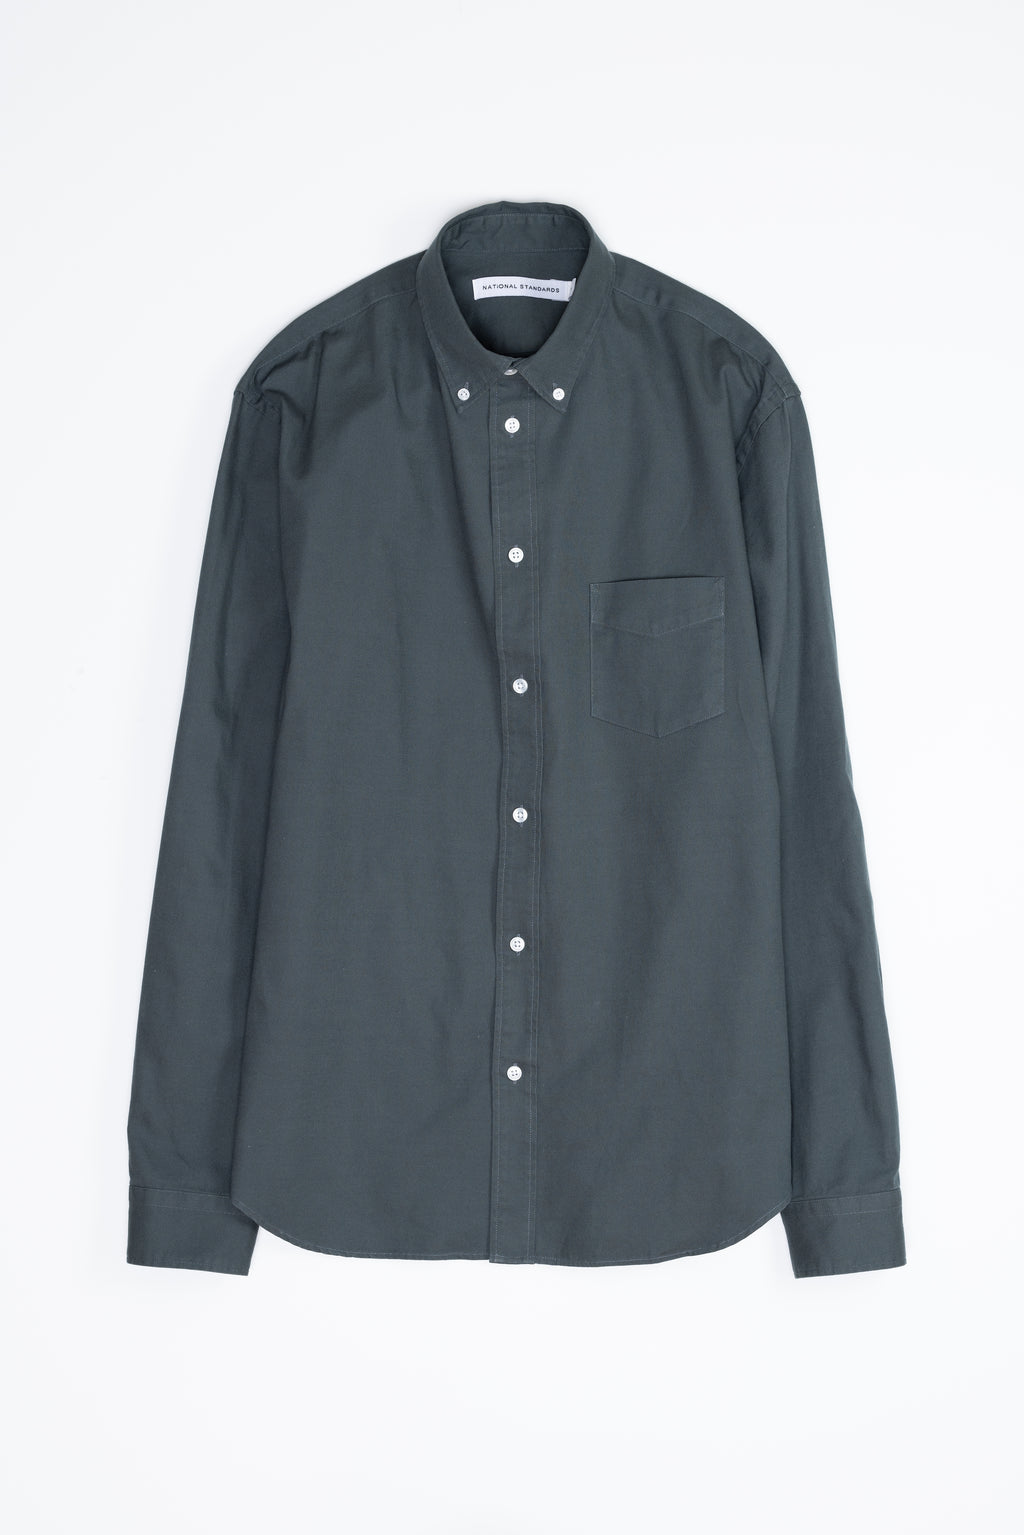 Japanese Washed Oxford in Slate 01